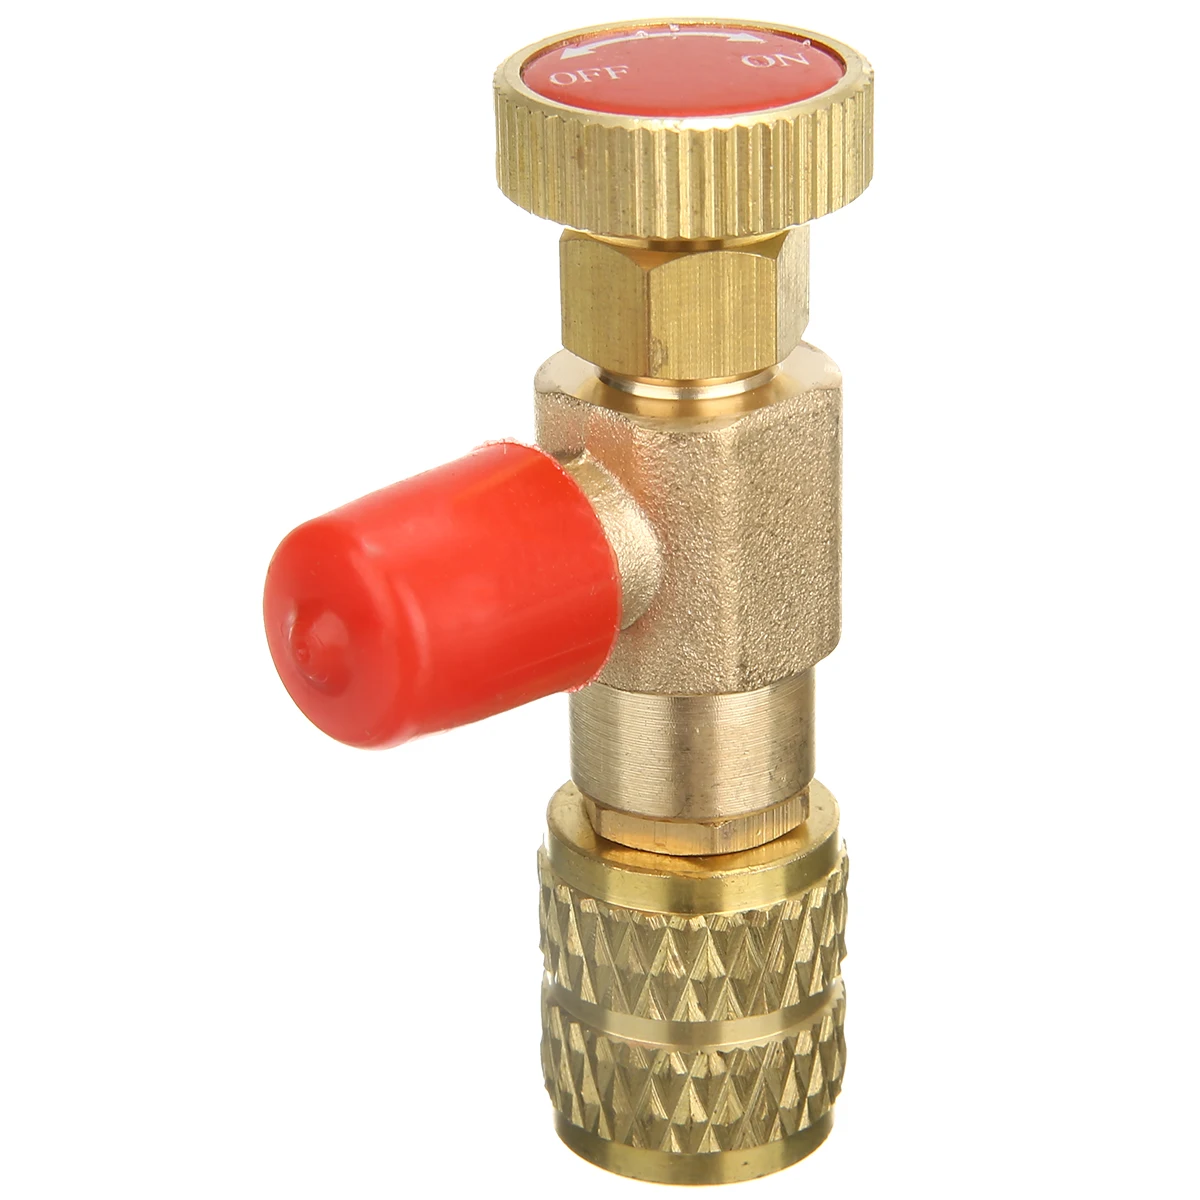 DONGMAO Air conditioning Refrigerant Valve Adapter 1/4 SAE Male to 5/16 SAE Female Charging Hose Flow Control Valves R410A 